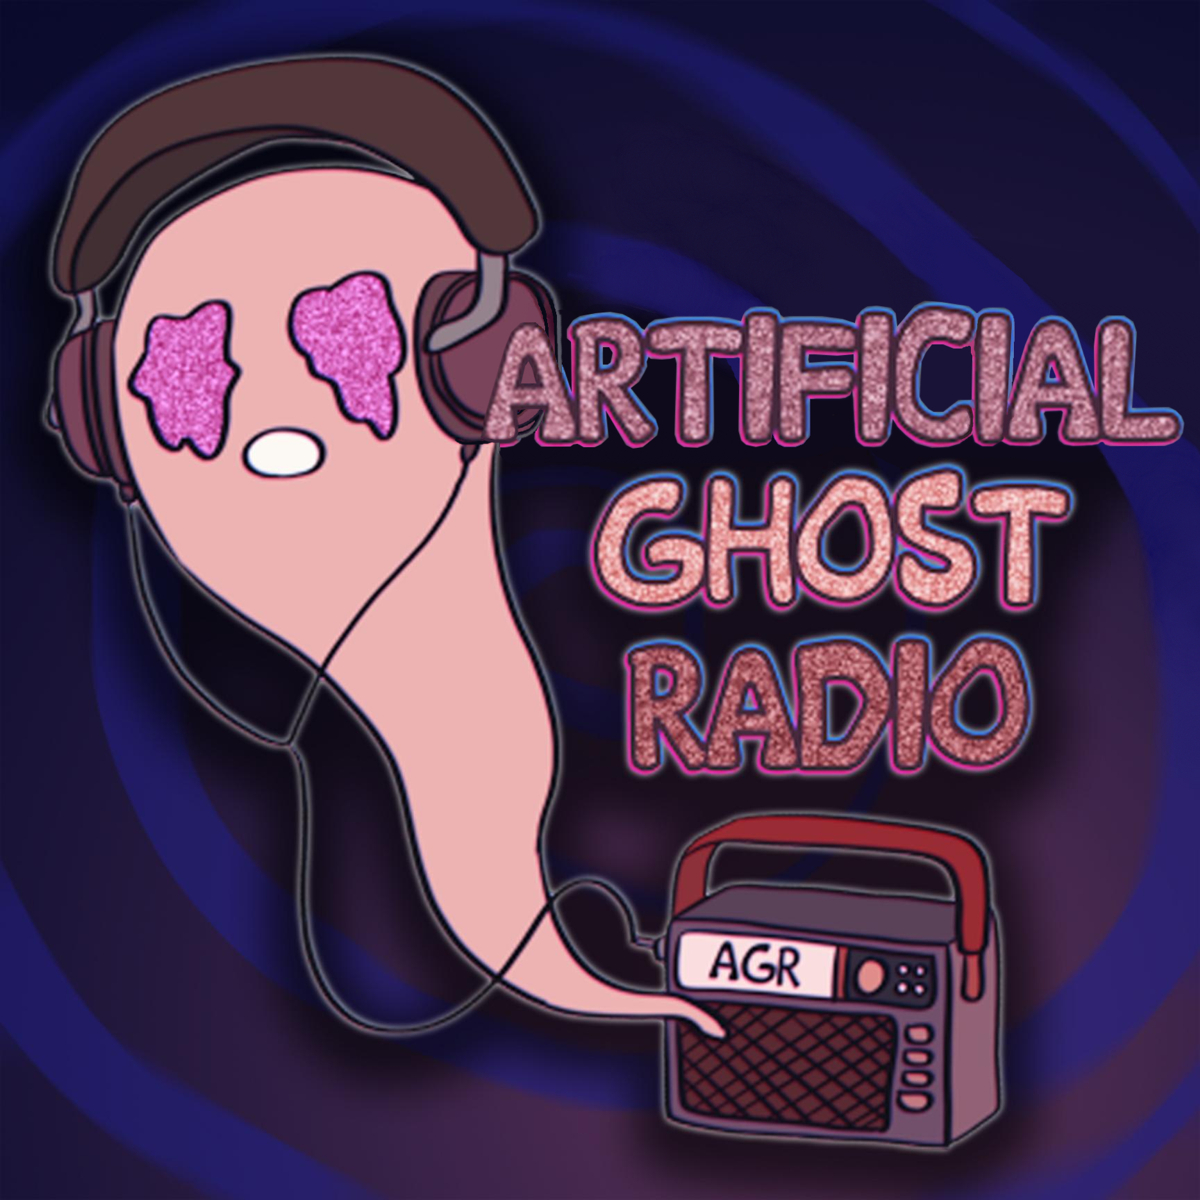 ARTIFICIAL GHOST RADIO cover art. A ghost named Lyric has emerged out of a retro radio. Lyric is wearing headphones and has static in their eyes. They are possessed by the music.